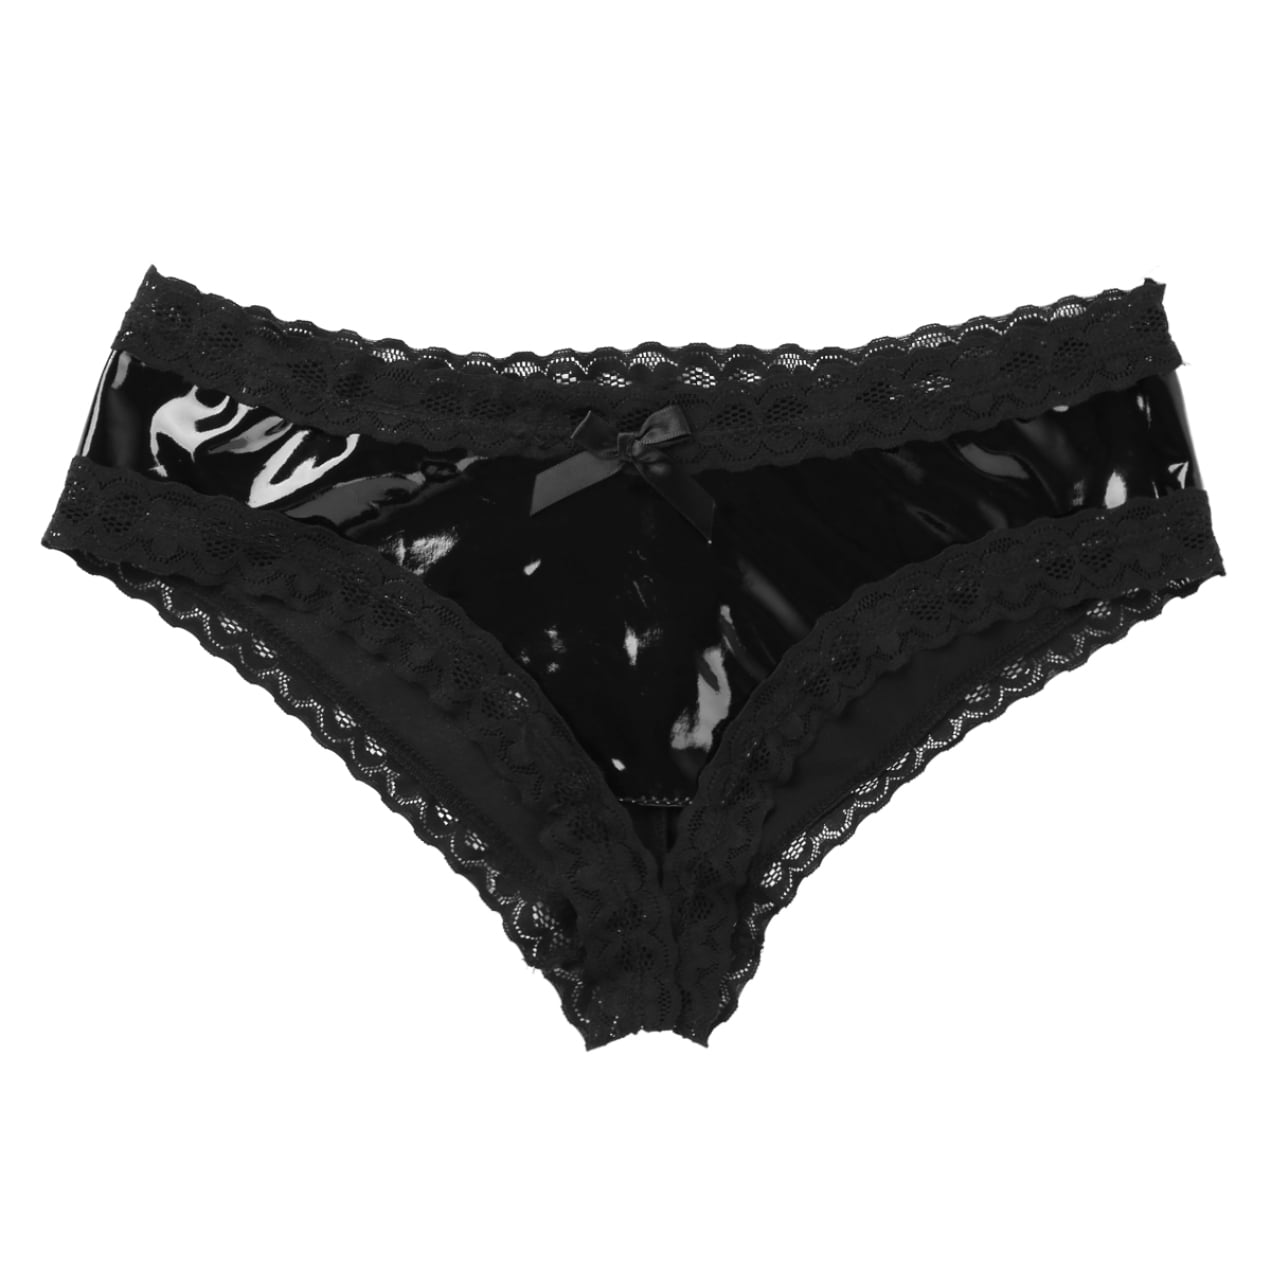 iEFiEL Womens Wet Look Patent Leather Panties Lace Open Crotch